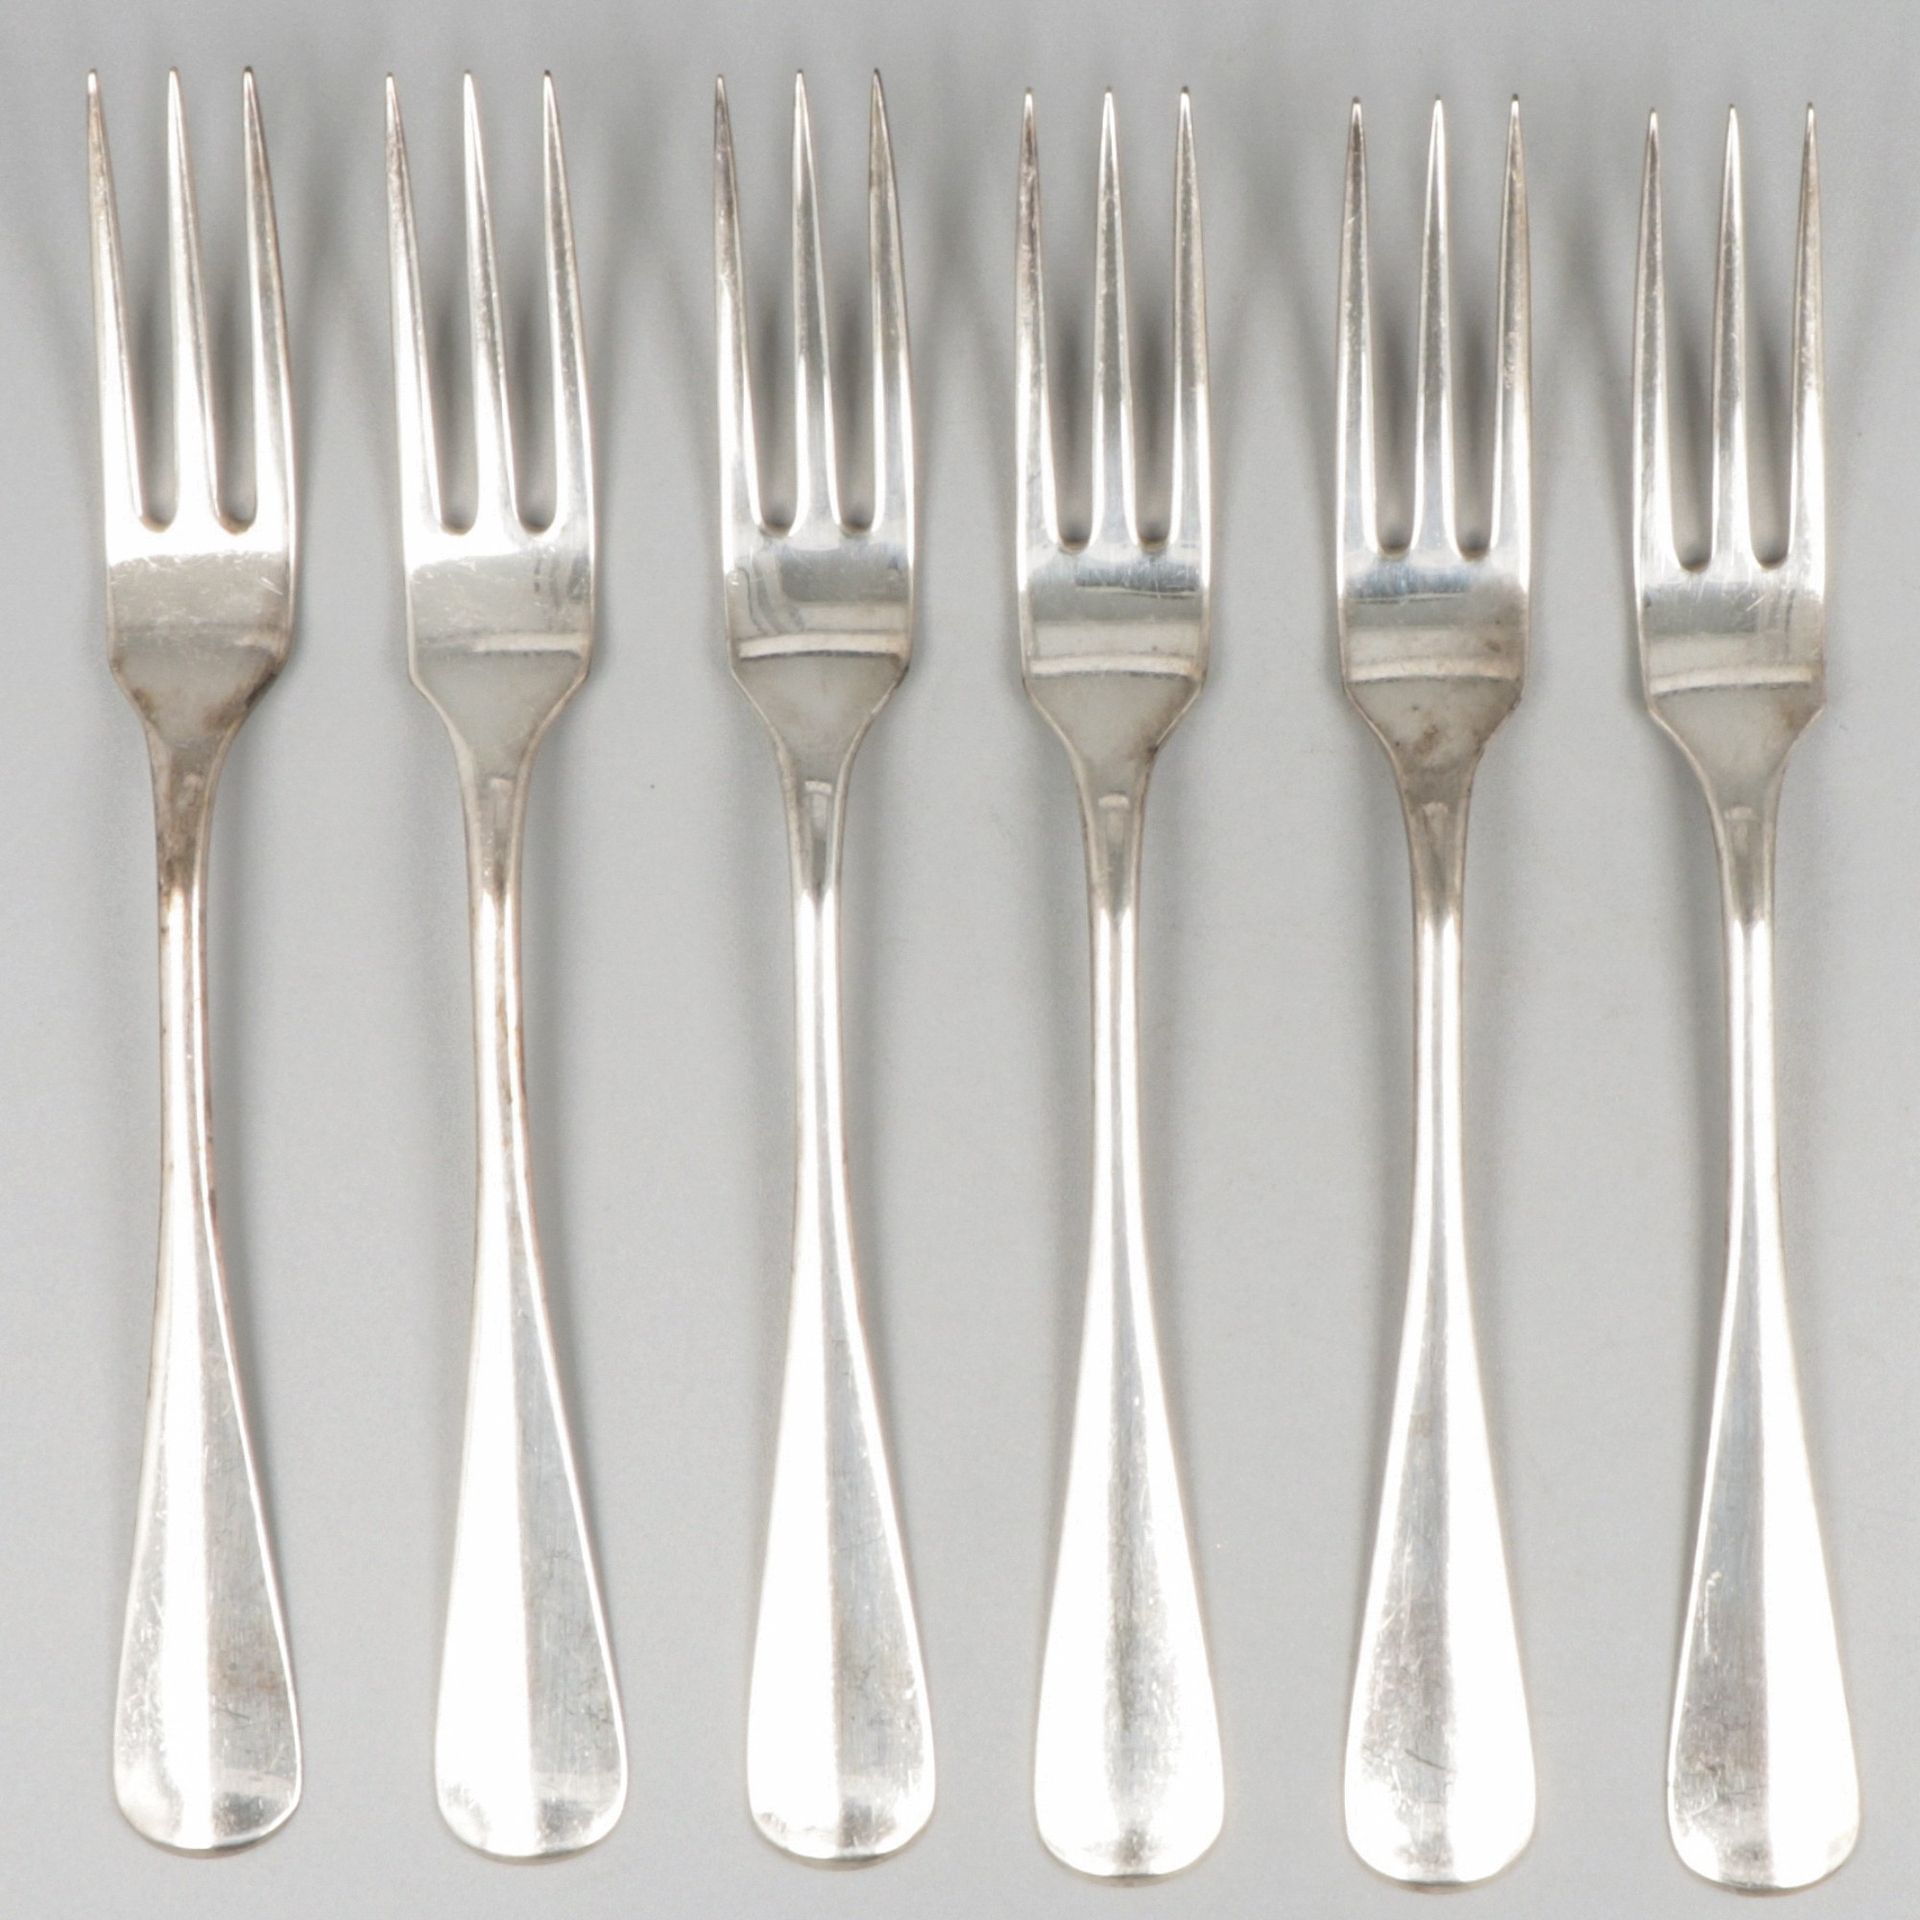 6-piece set breakfast forks silver. "Hollands Glad" or Dutch smooth. The Netherl&hellip;